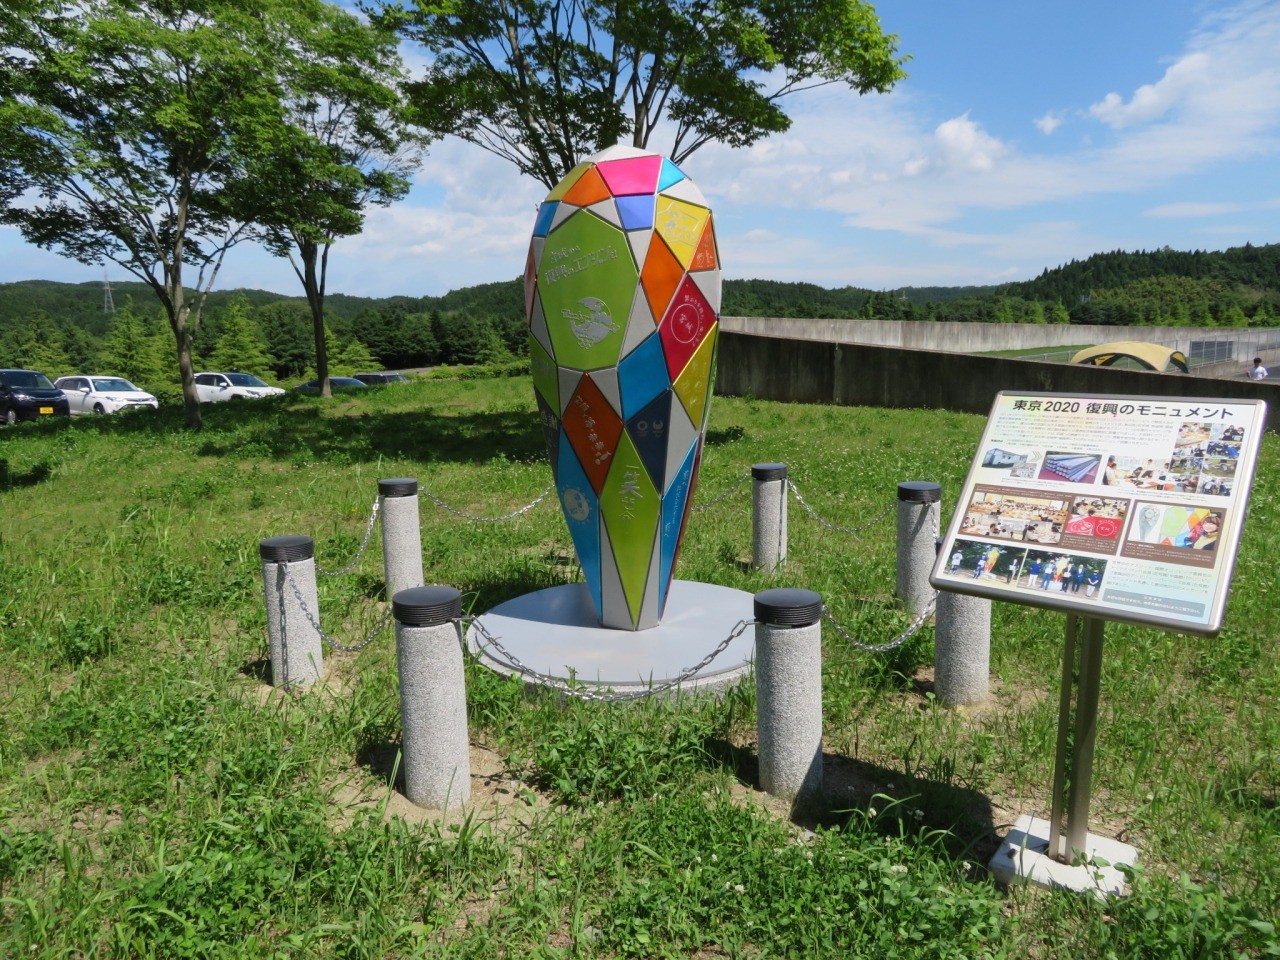 Tokyo 2020 Recovery Monument